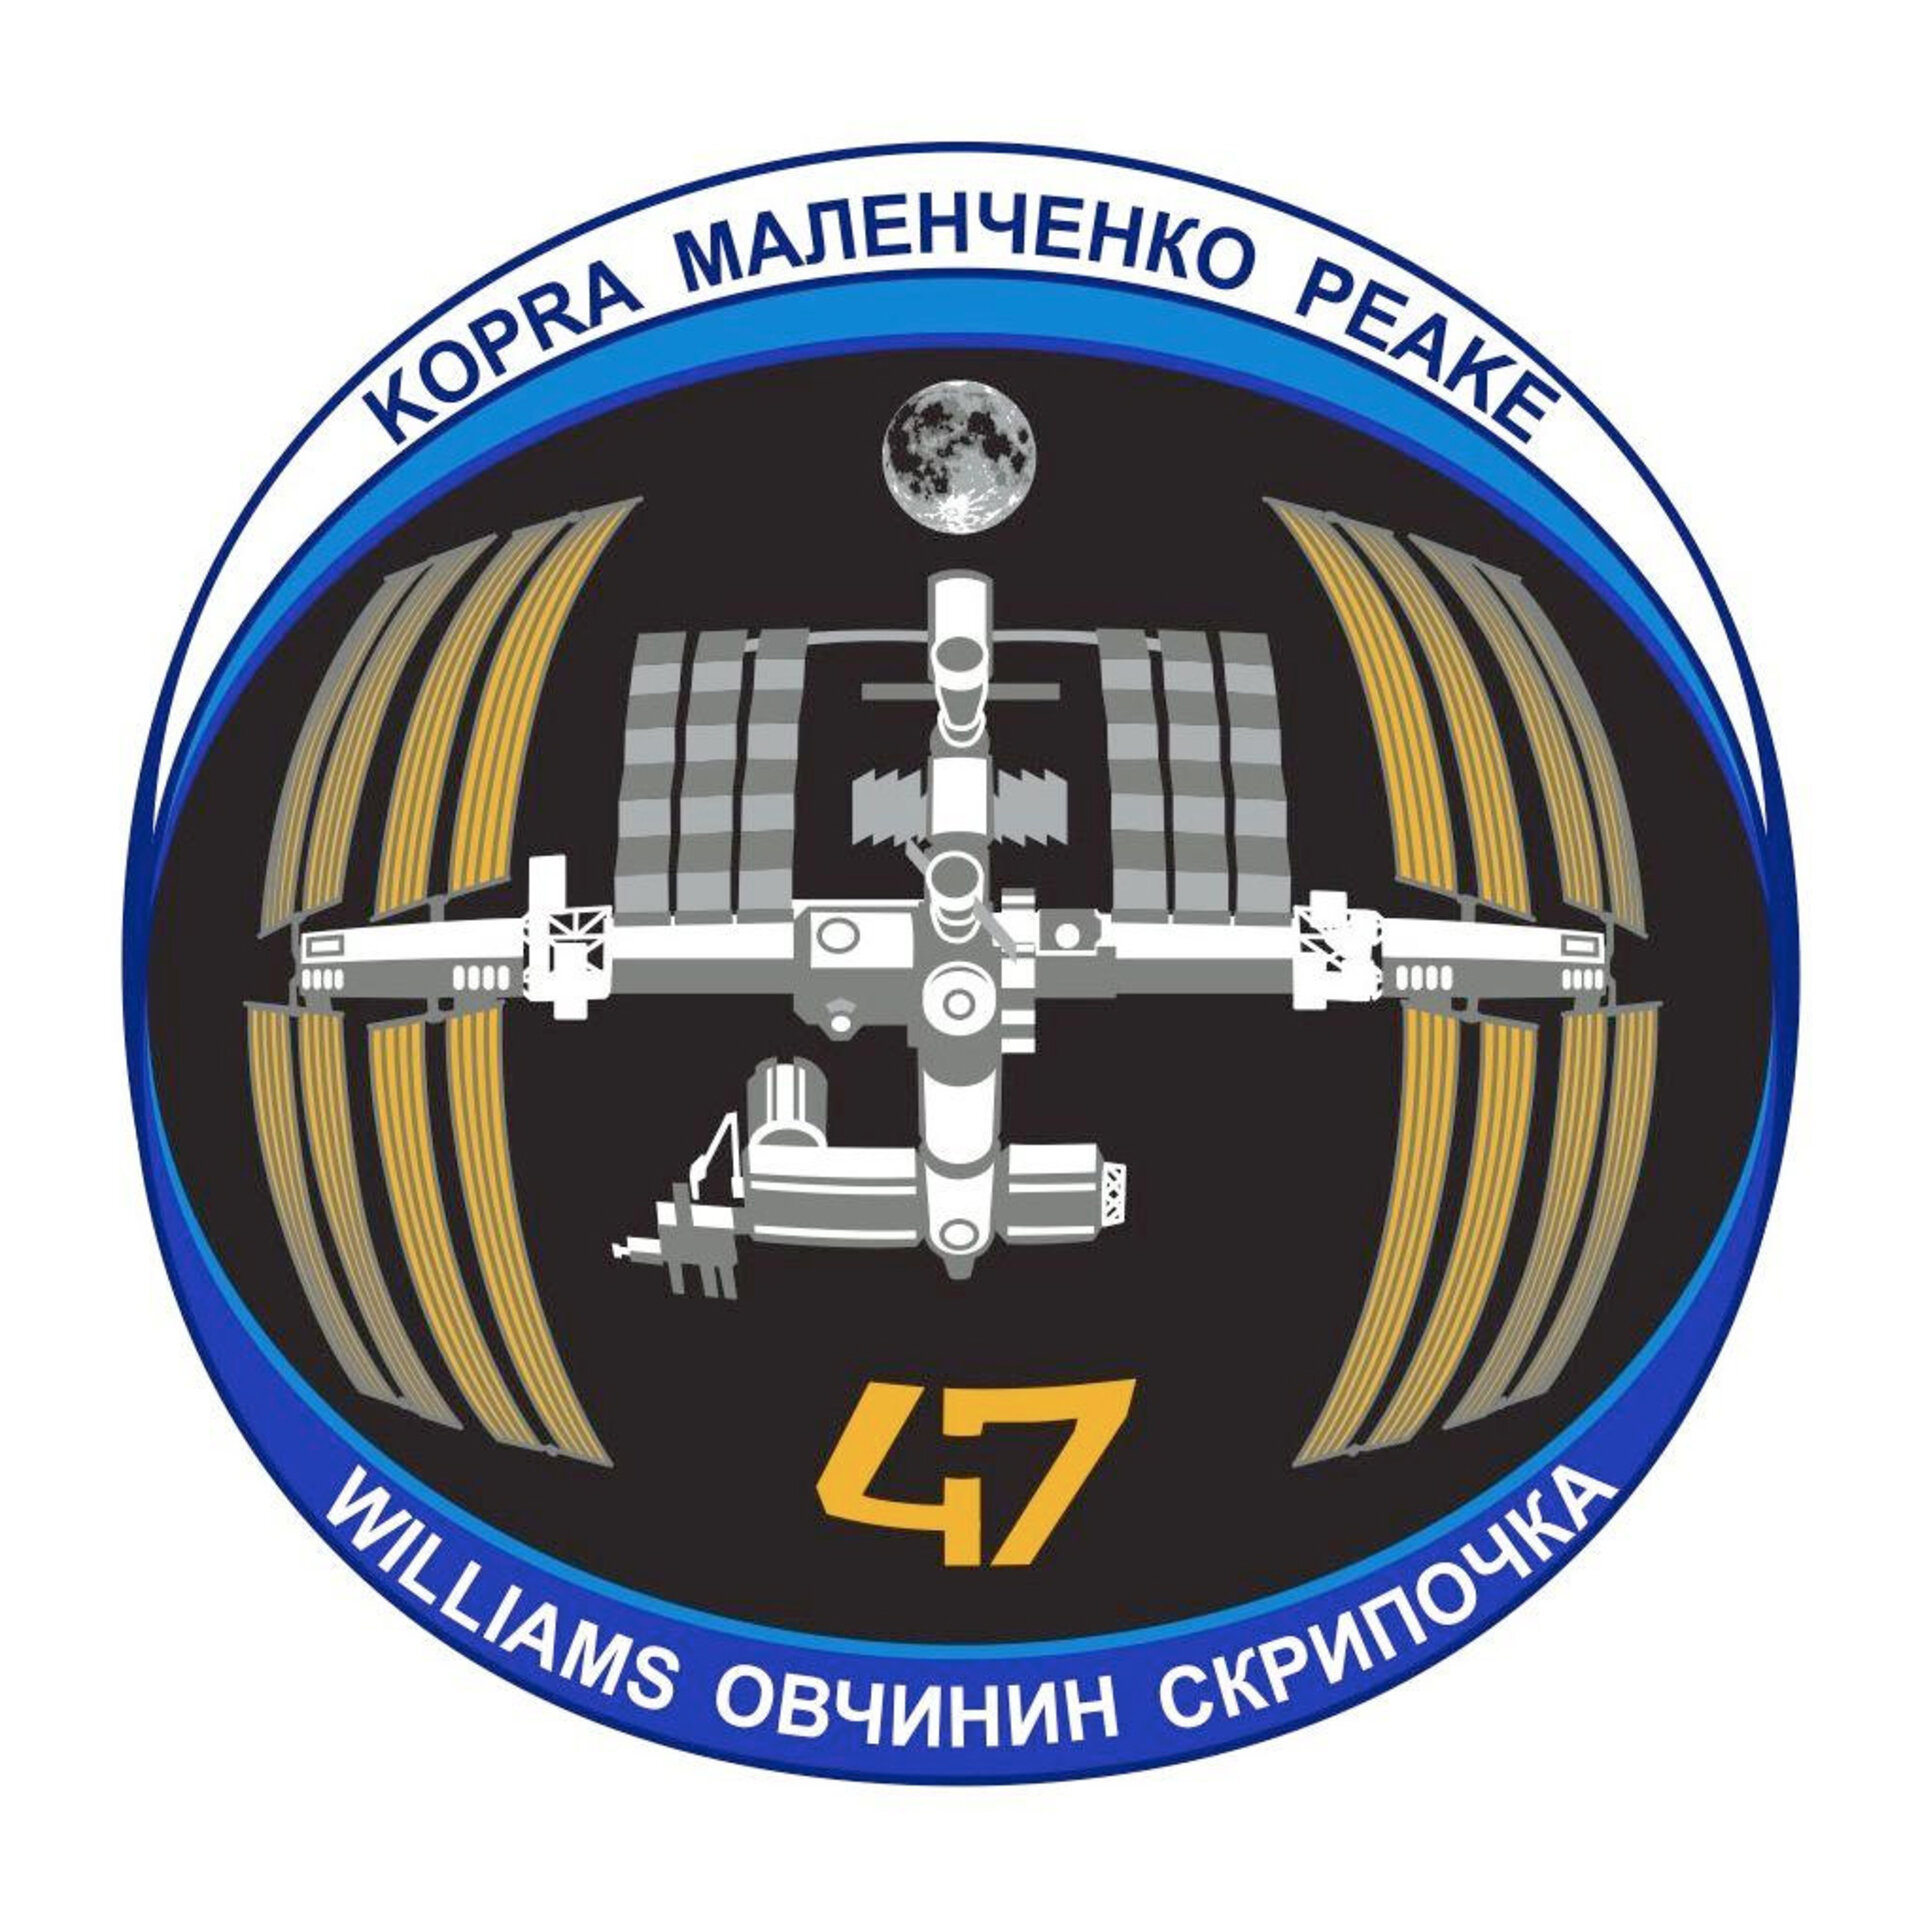 ISS Expedition 47 patch, 2016